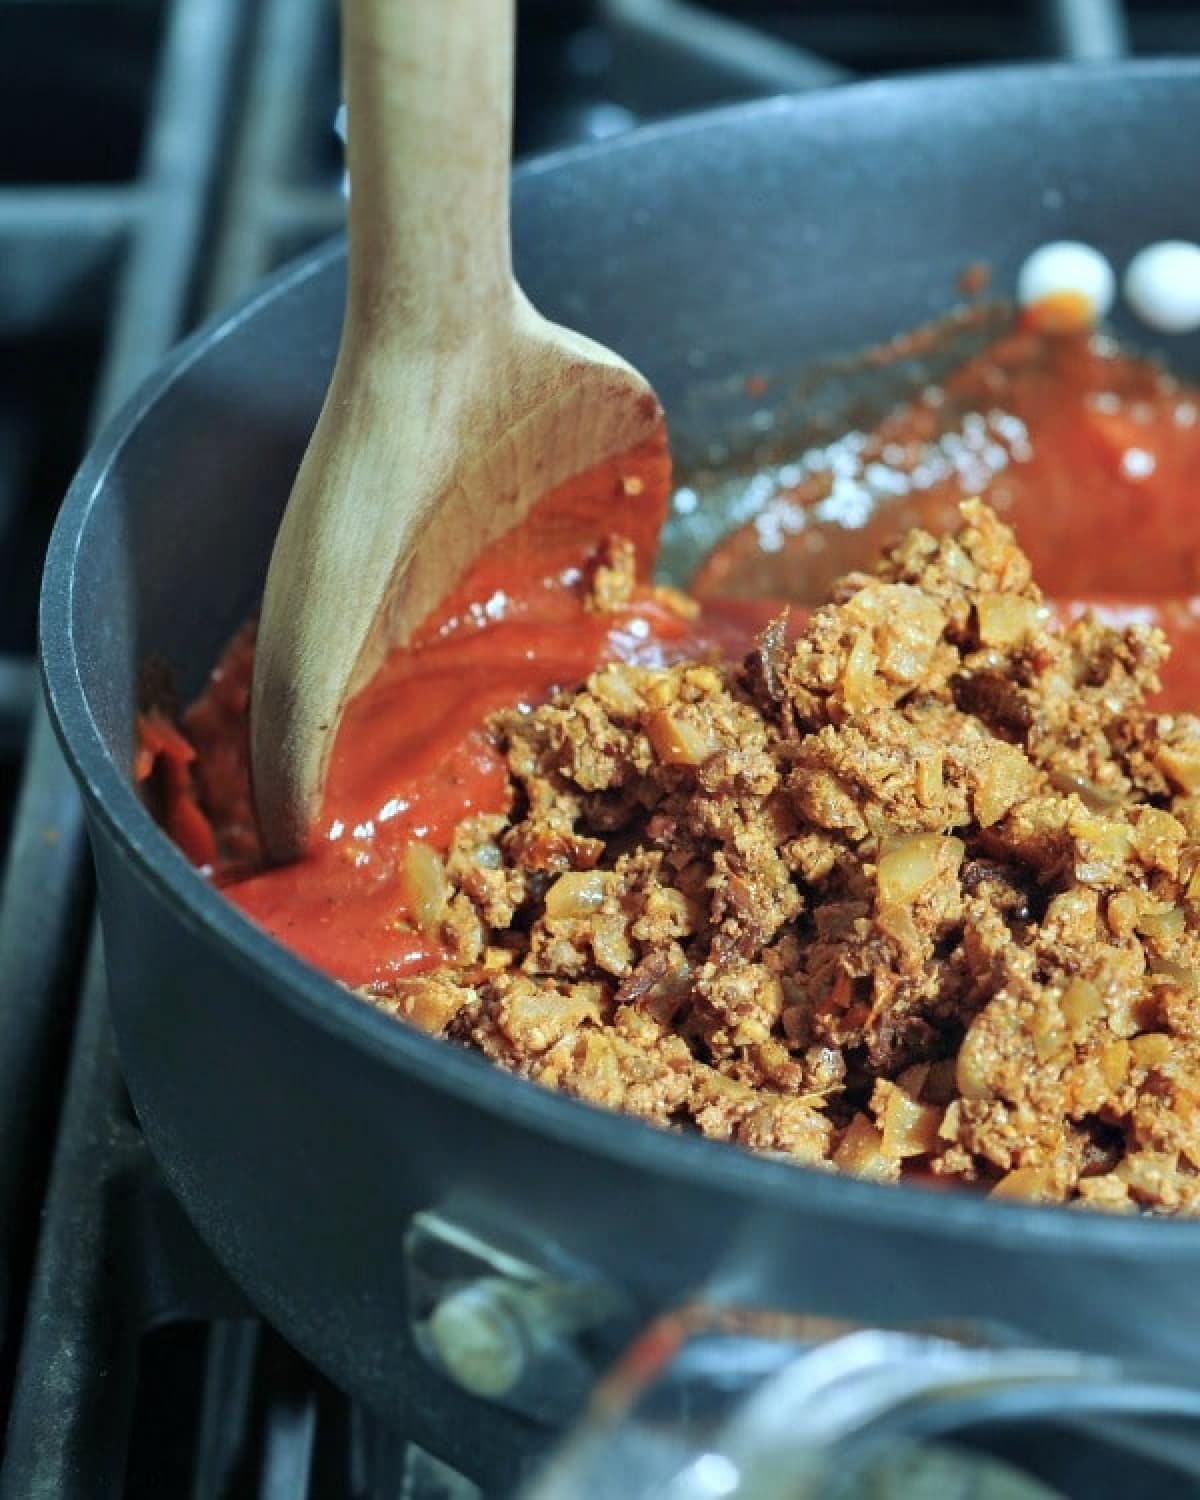 Vegan ground beef being stirred into red sauce in a skillet on a stove top.